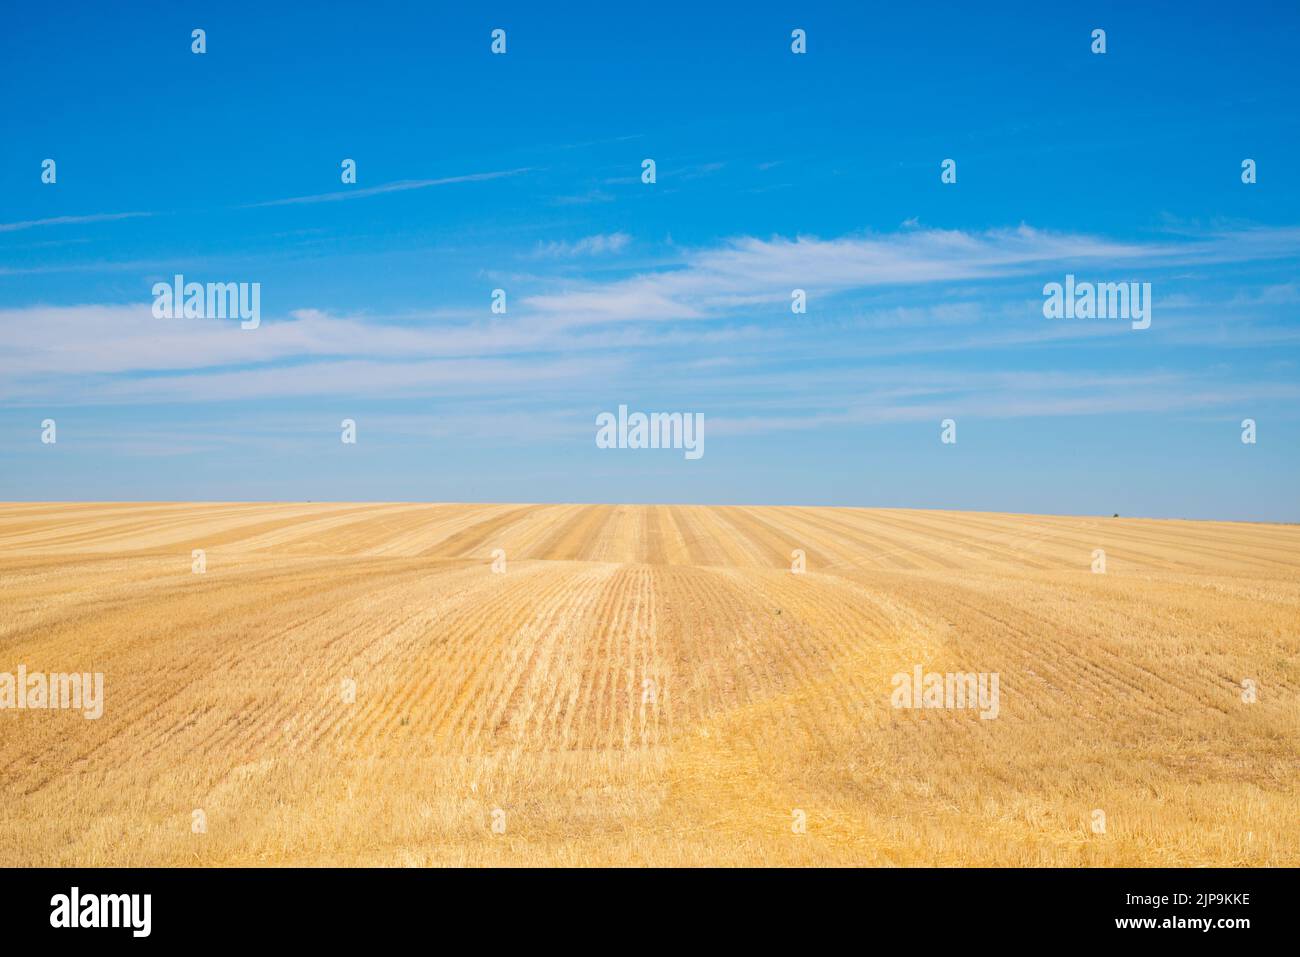 Harvested field. Stock Photo